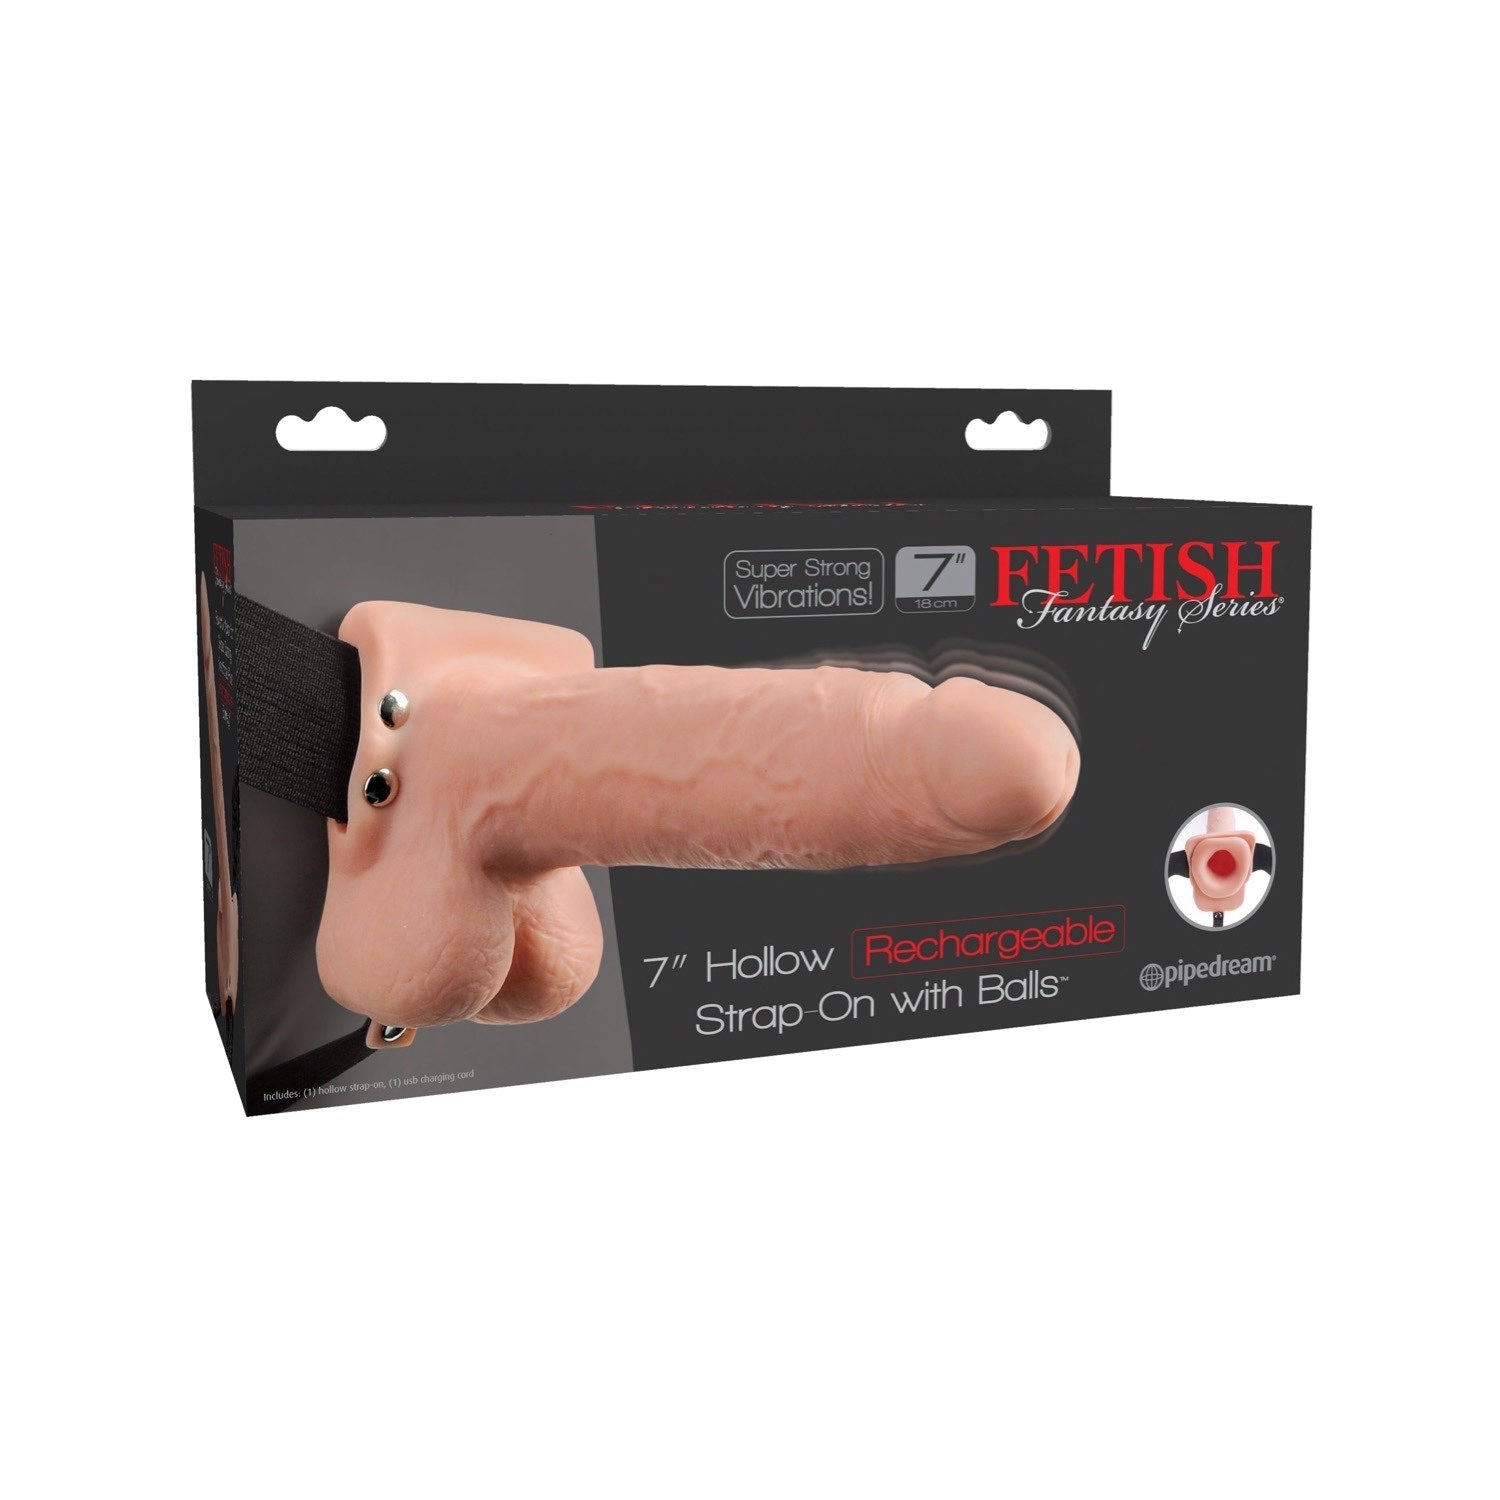 Fetish Fantasy Series 7&quot; Hollow Rechargeable Strap-On with Balls - Flesh 17.8 cm Vibrating Hollow Strap-On by Pipedream